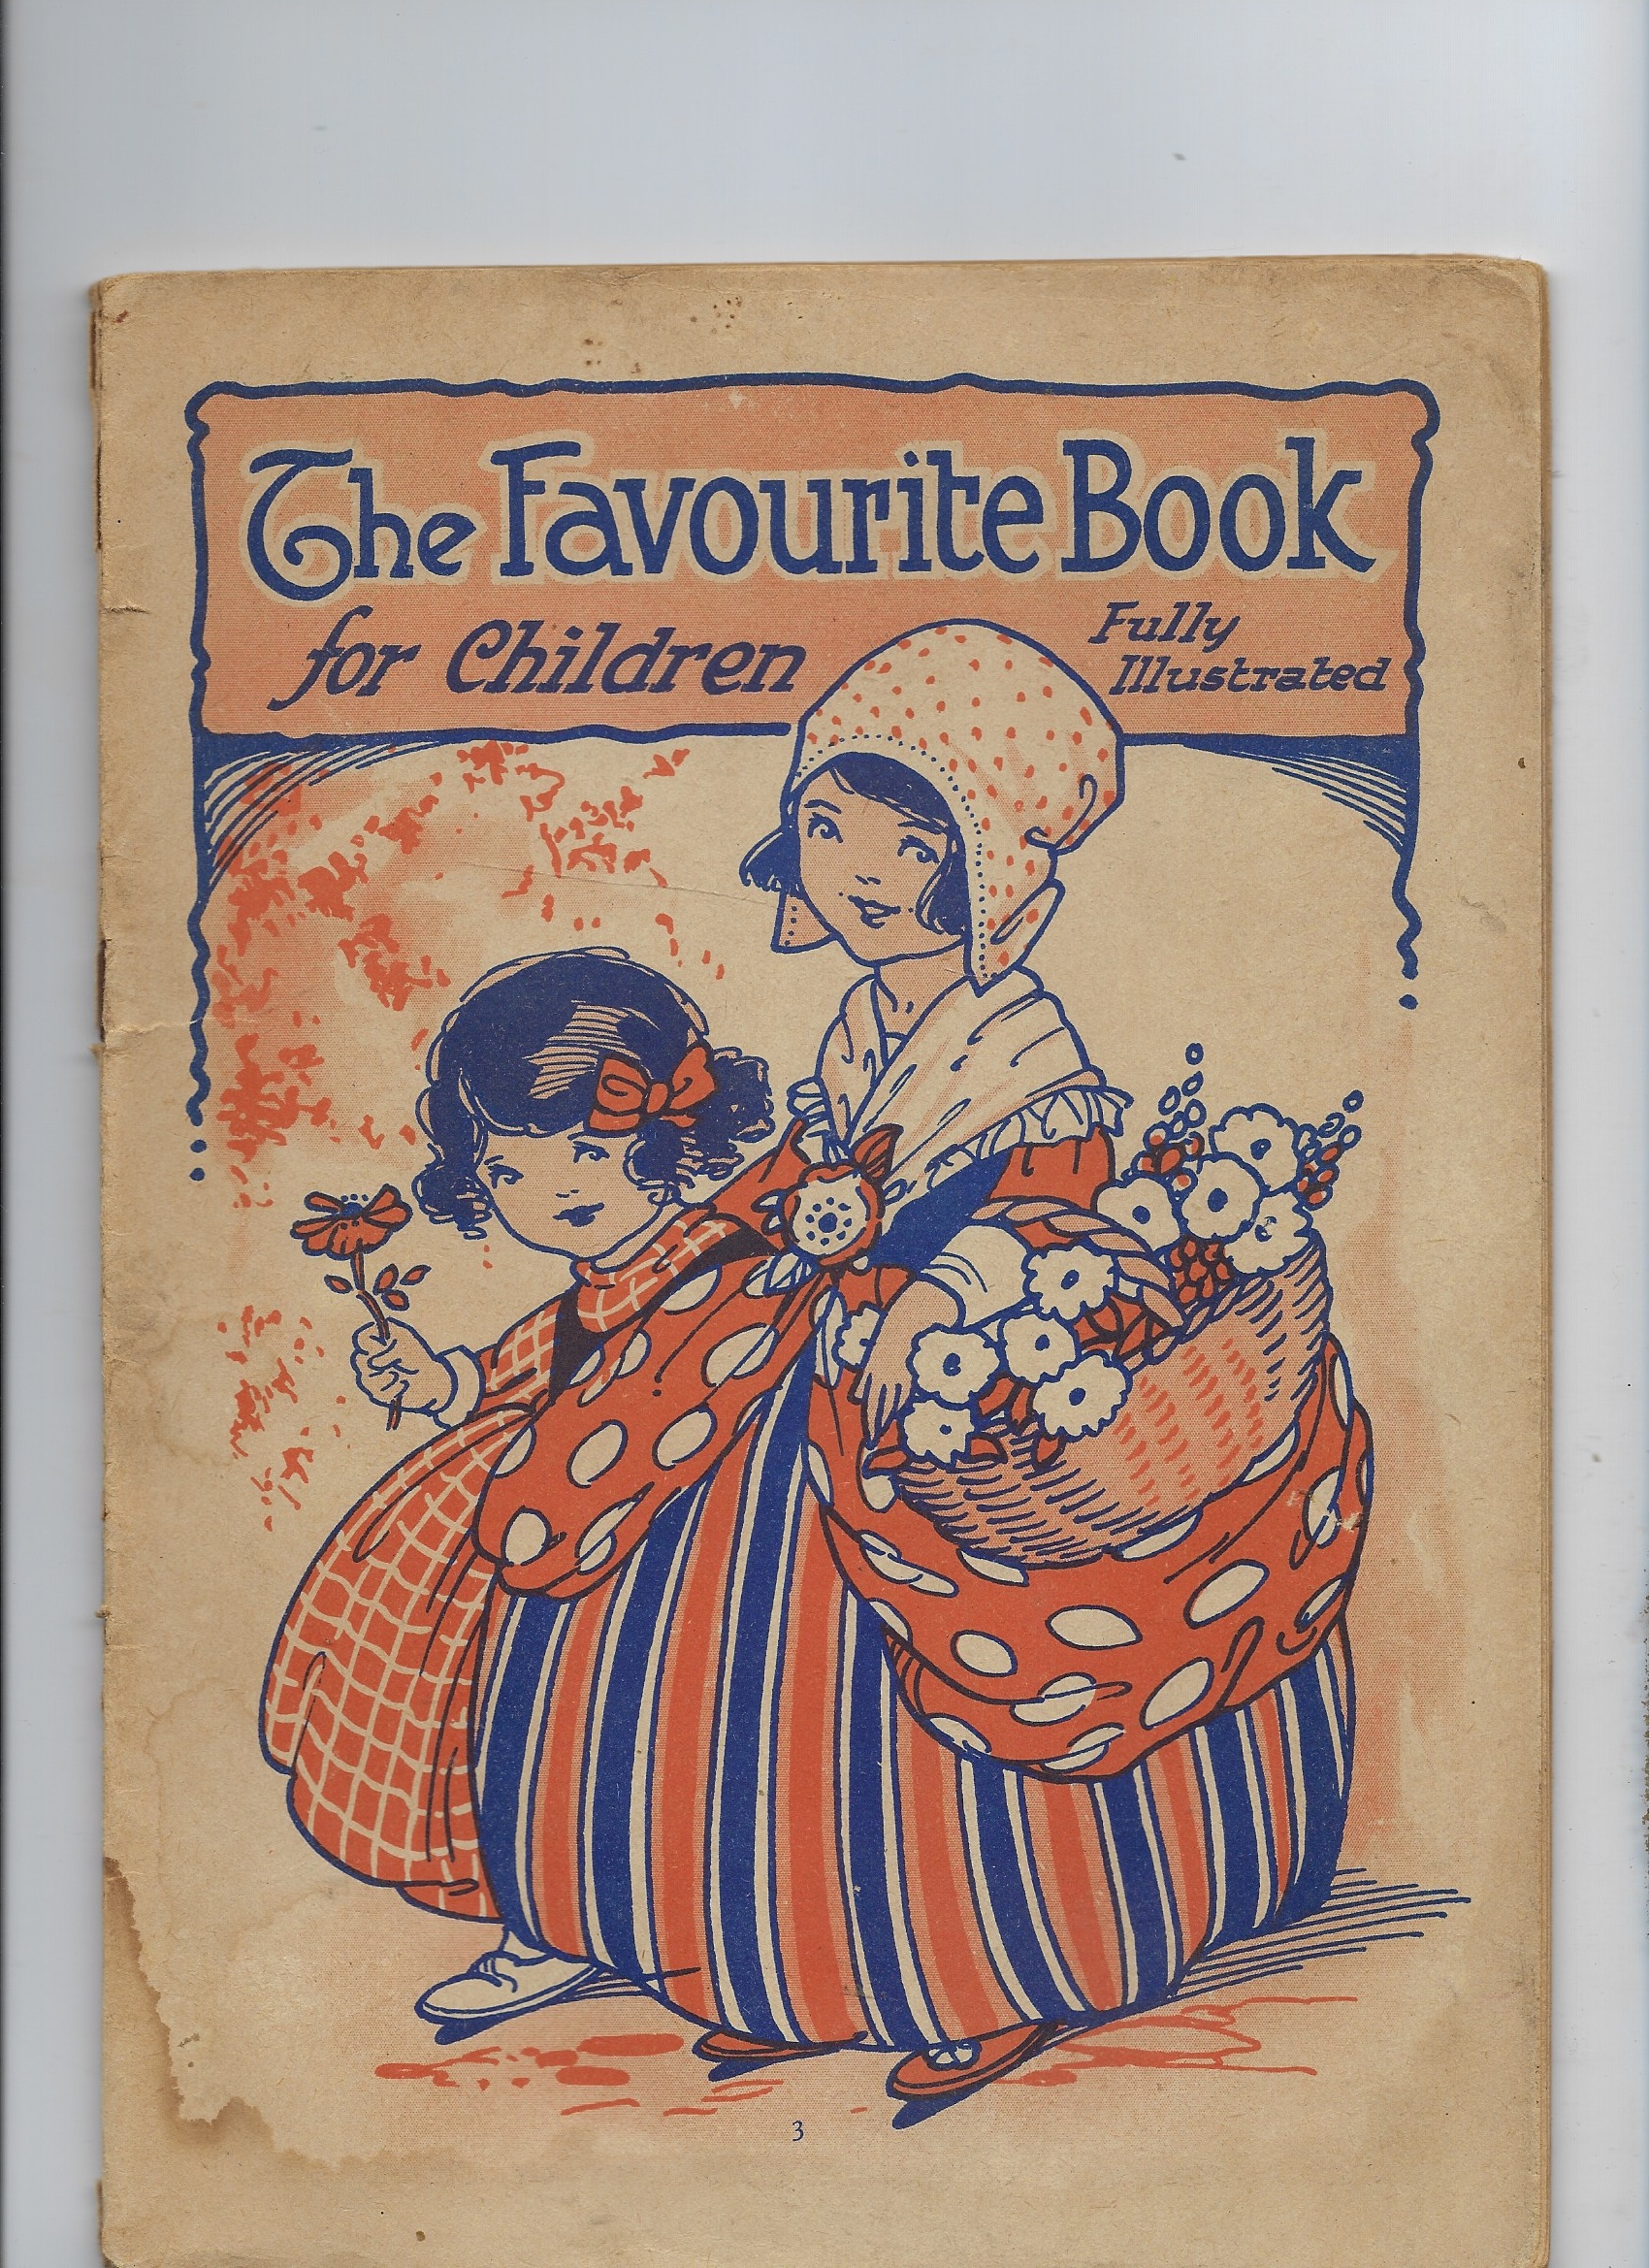 Image for The Favourite Book for Children - Fully Illustrated Containing 'seagulls'; the Artist'; Mrs Pig's Slumber Song; My Burglar; Nancy's Adventure; Peterkin's Pie; Bright-Eyes the Fairy; the Finding of Tibby & Plain Isabella Jane